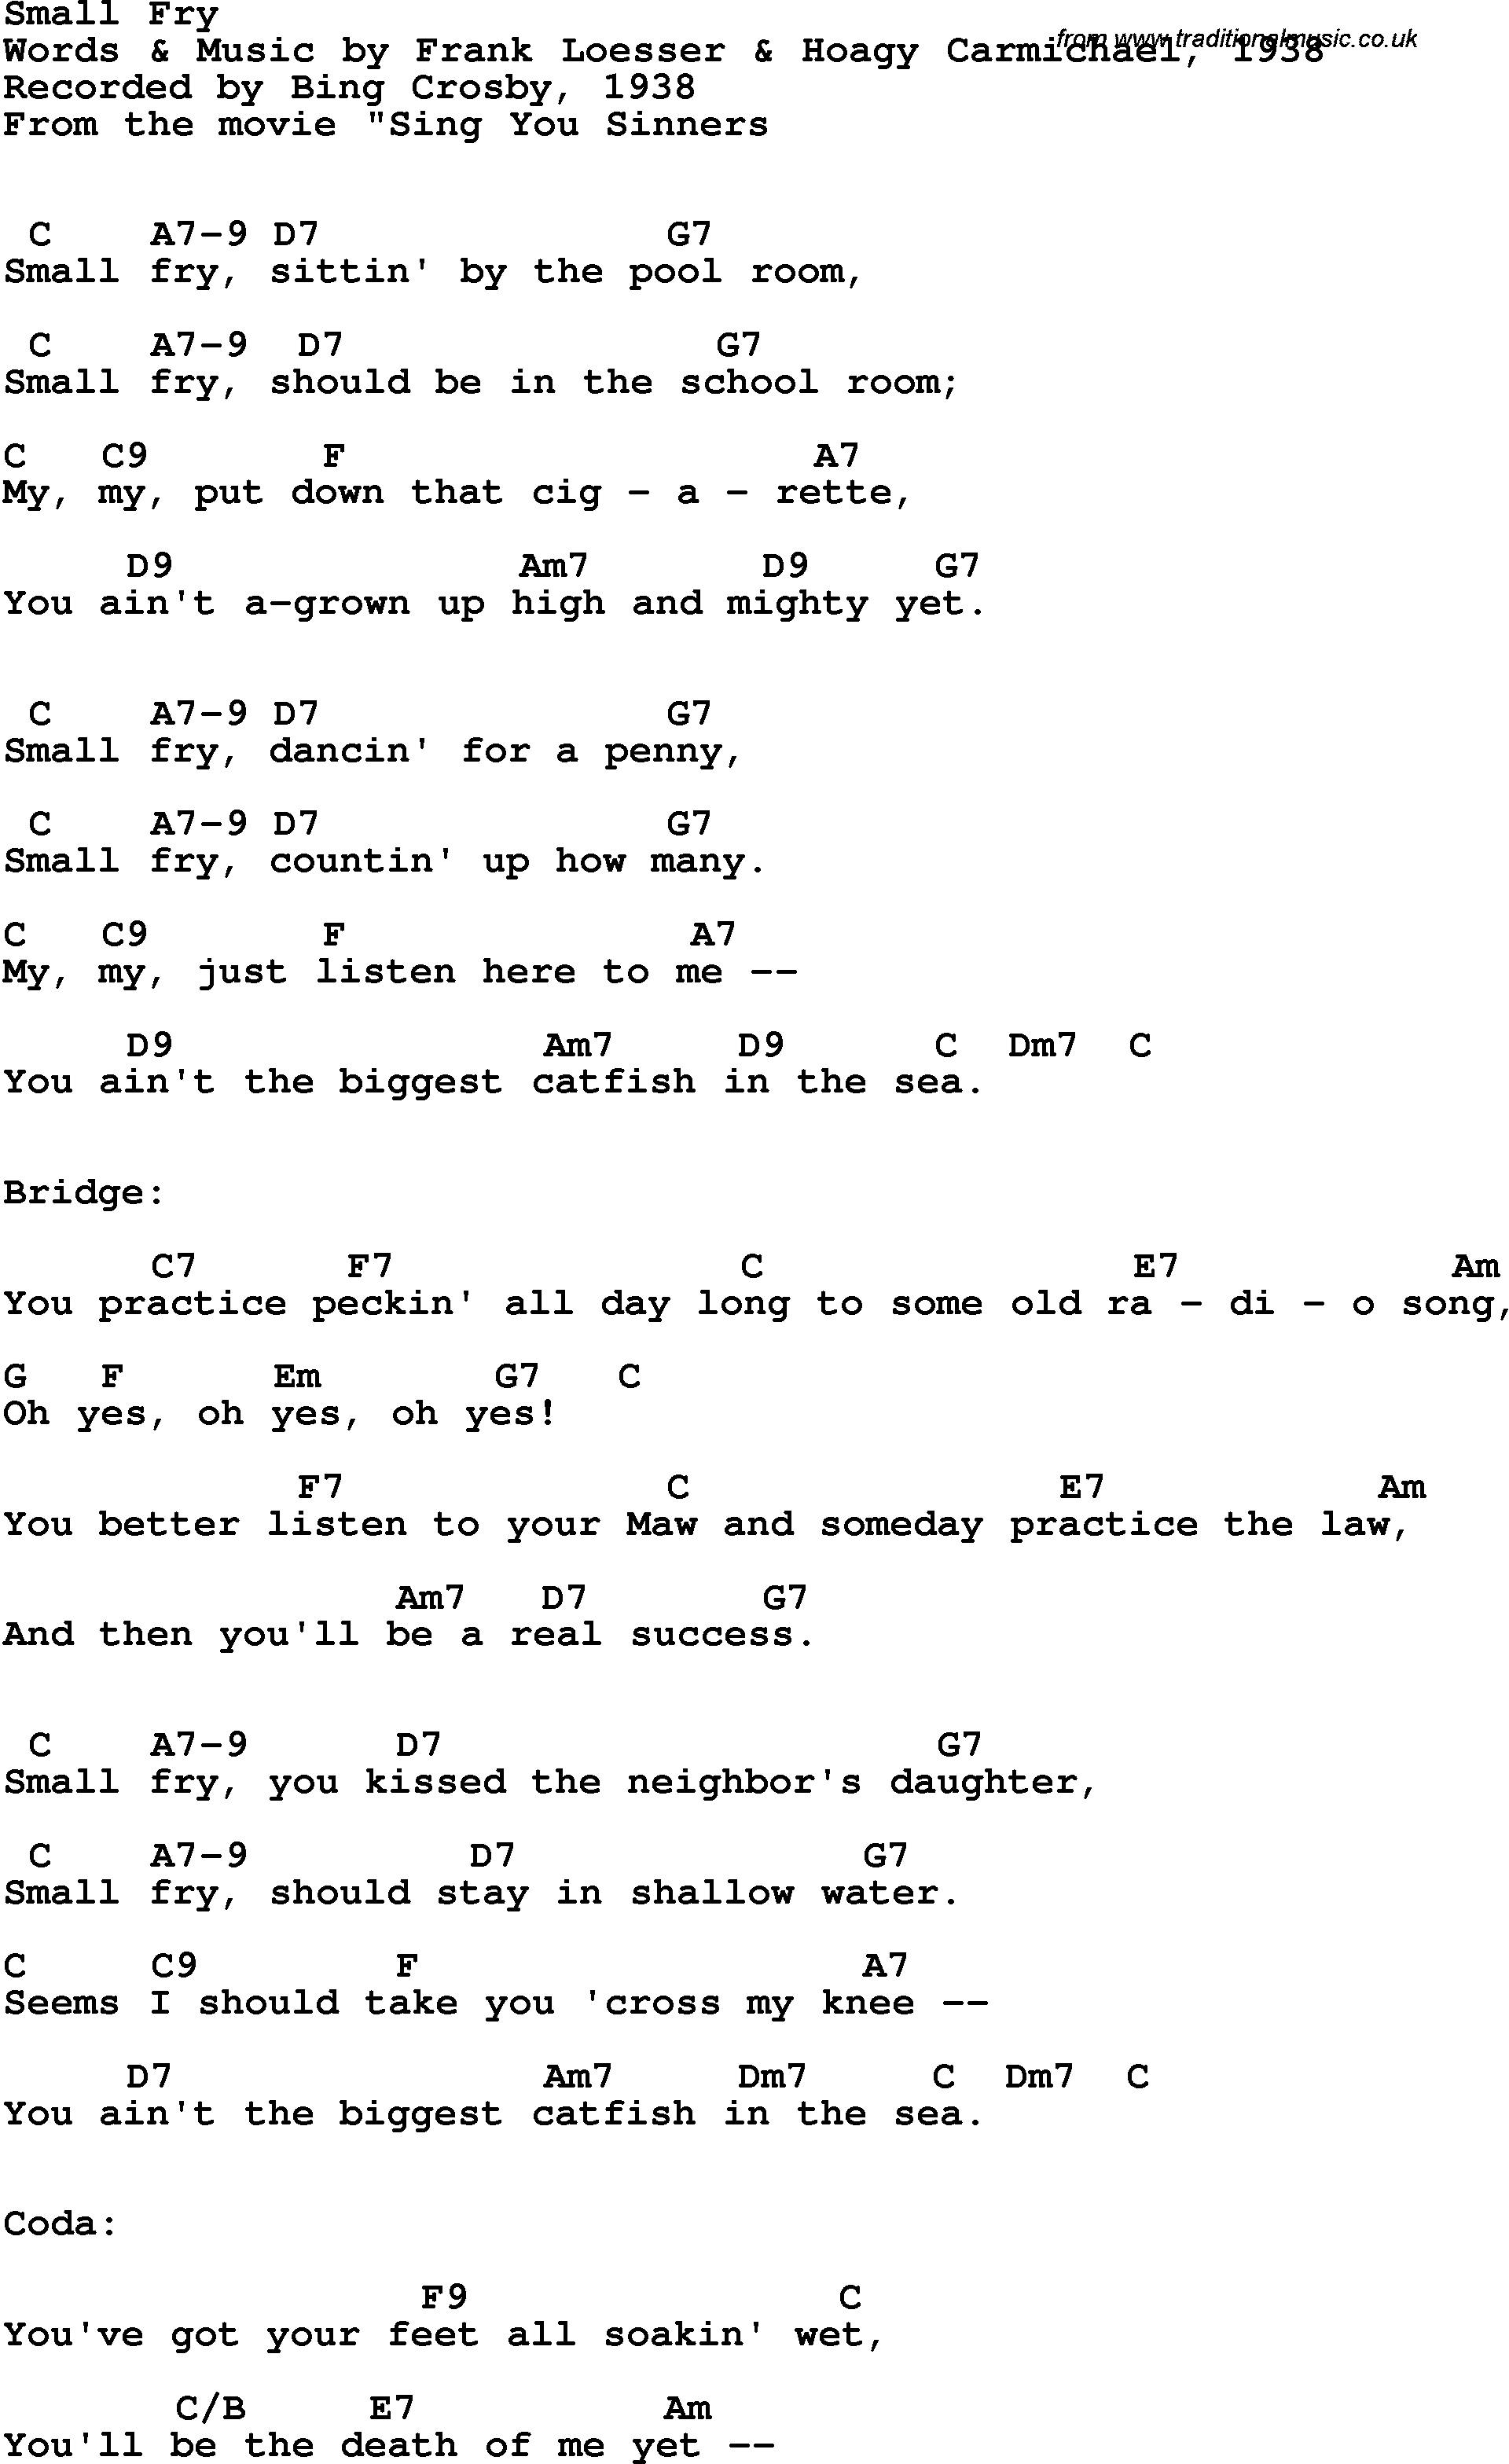 Song Lyrics with guitar chords for Small Fry - Bing Crosby, 1938